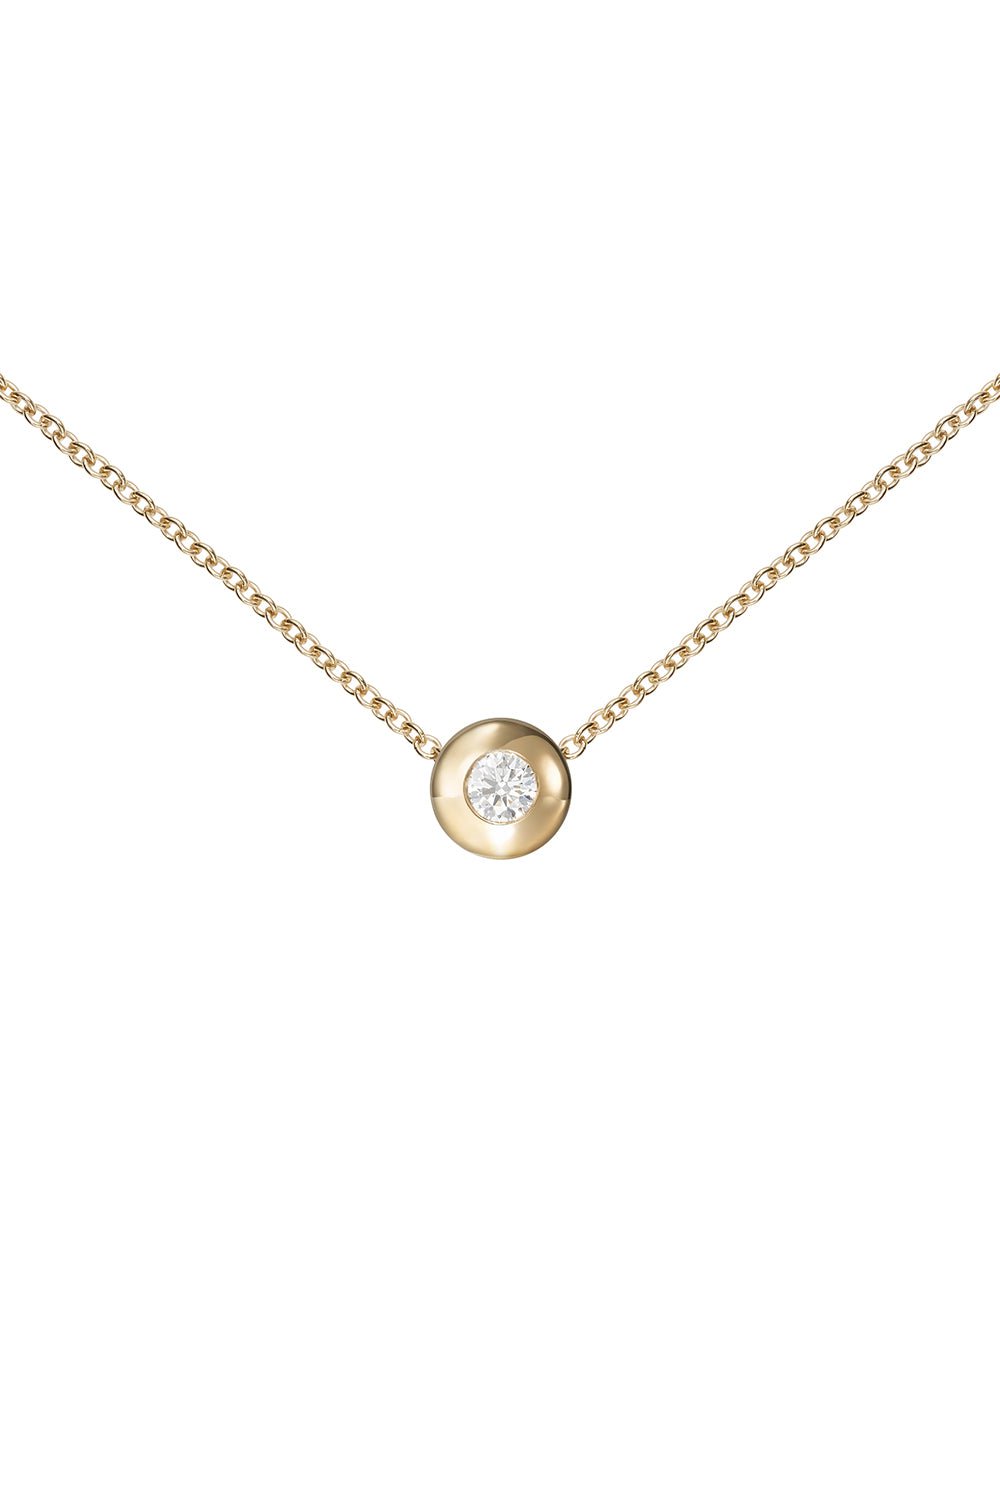 MELISSA KAYE-Small Audrey Pendant Necklace-YELLOW GOLD